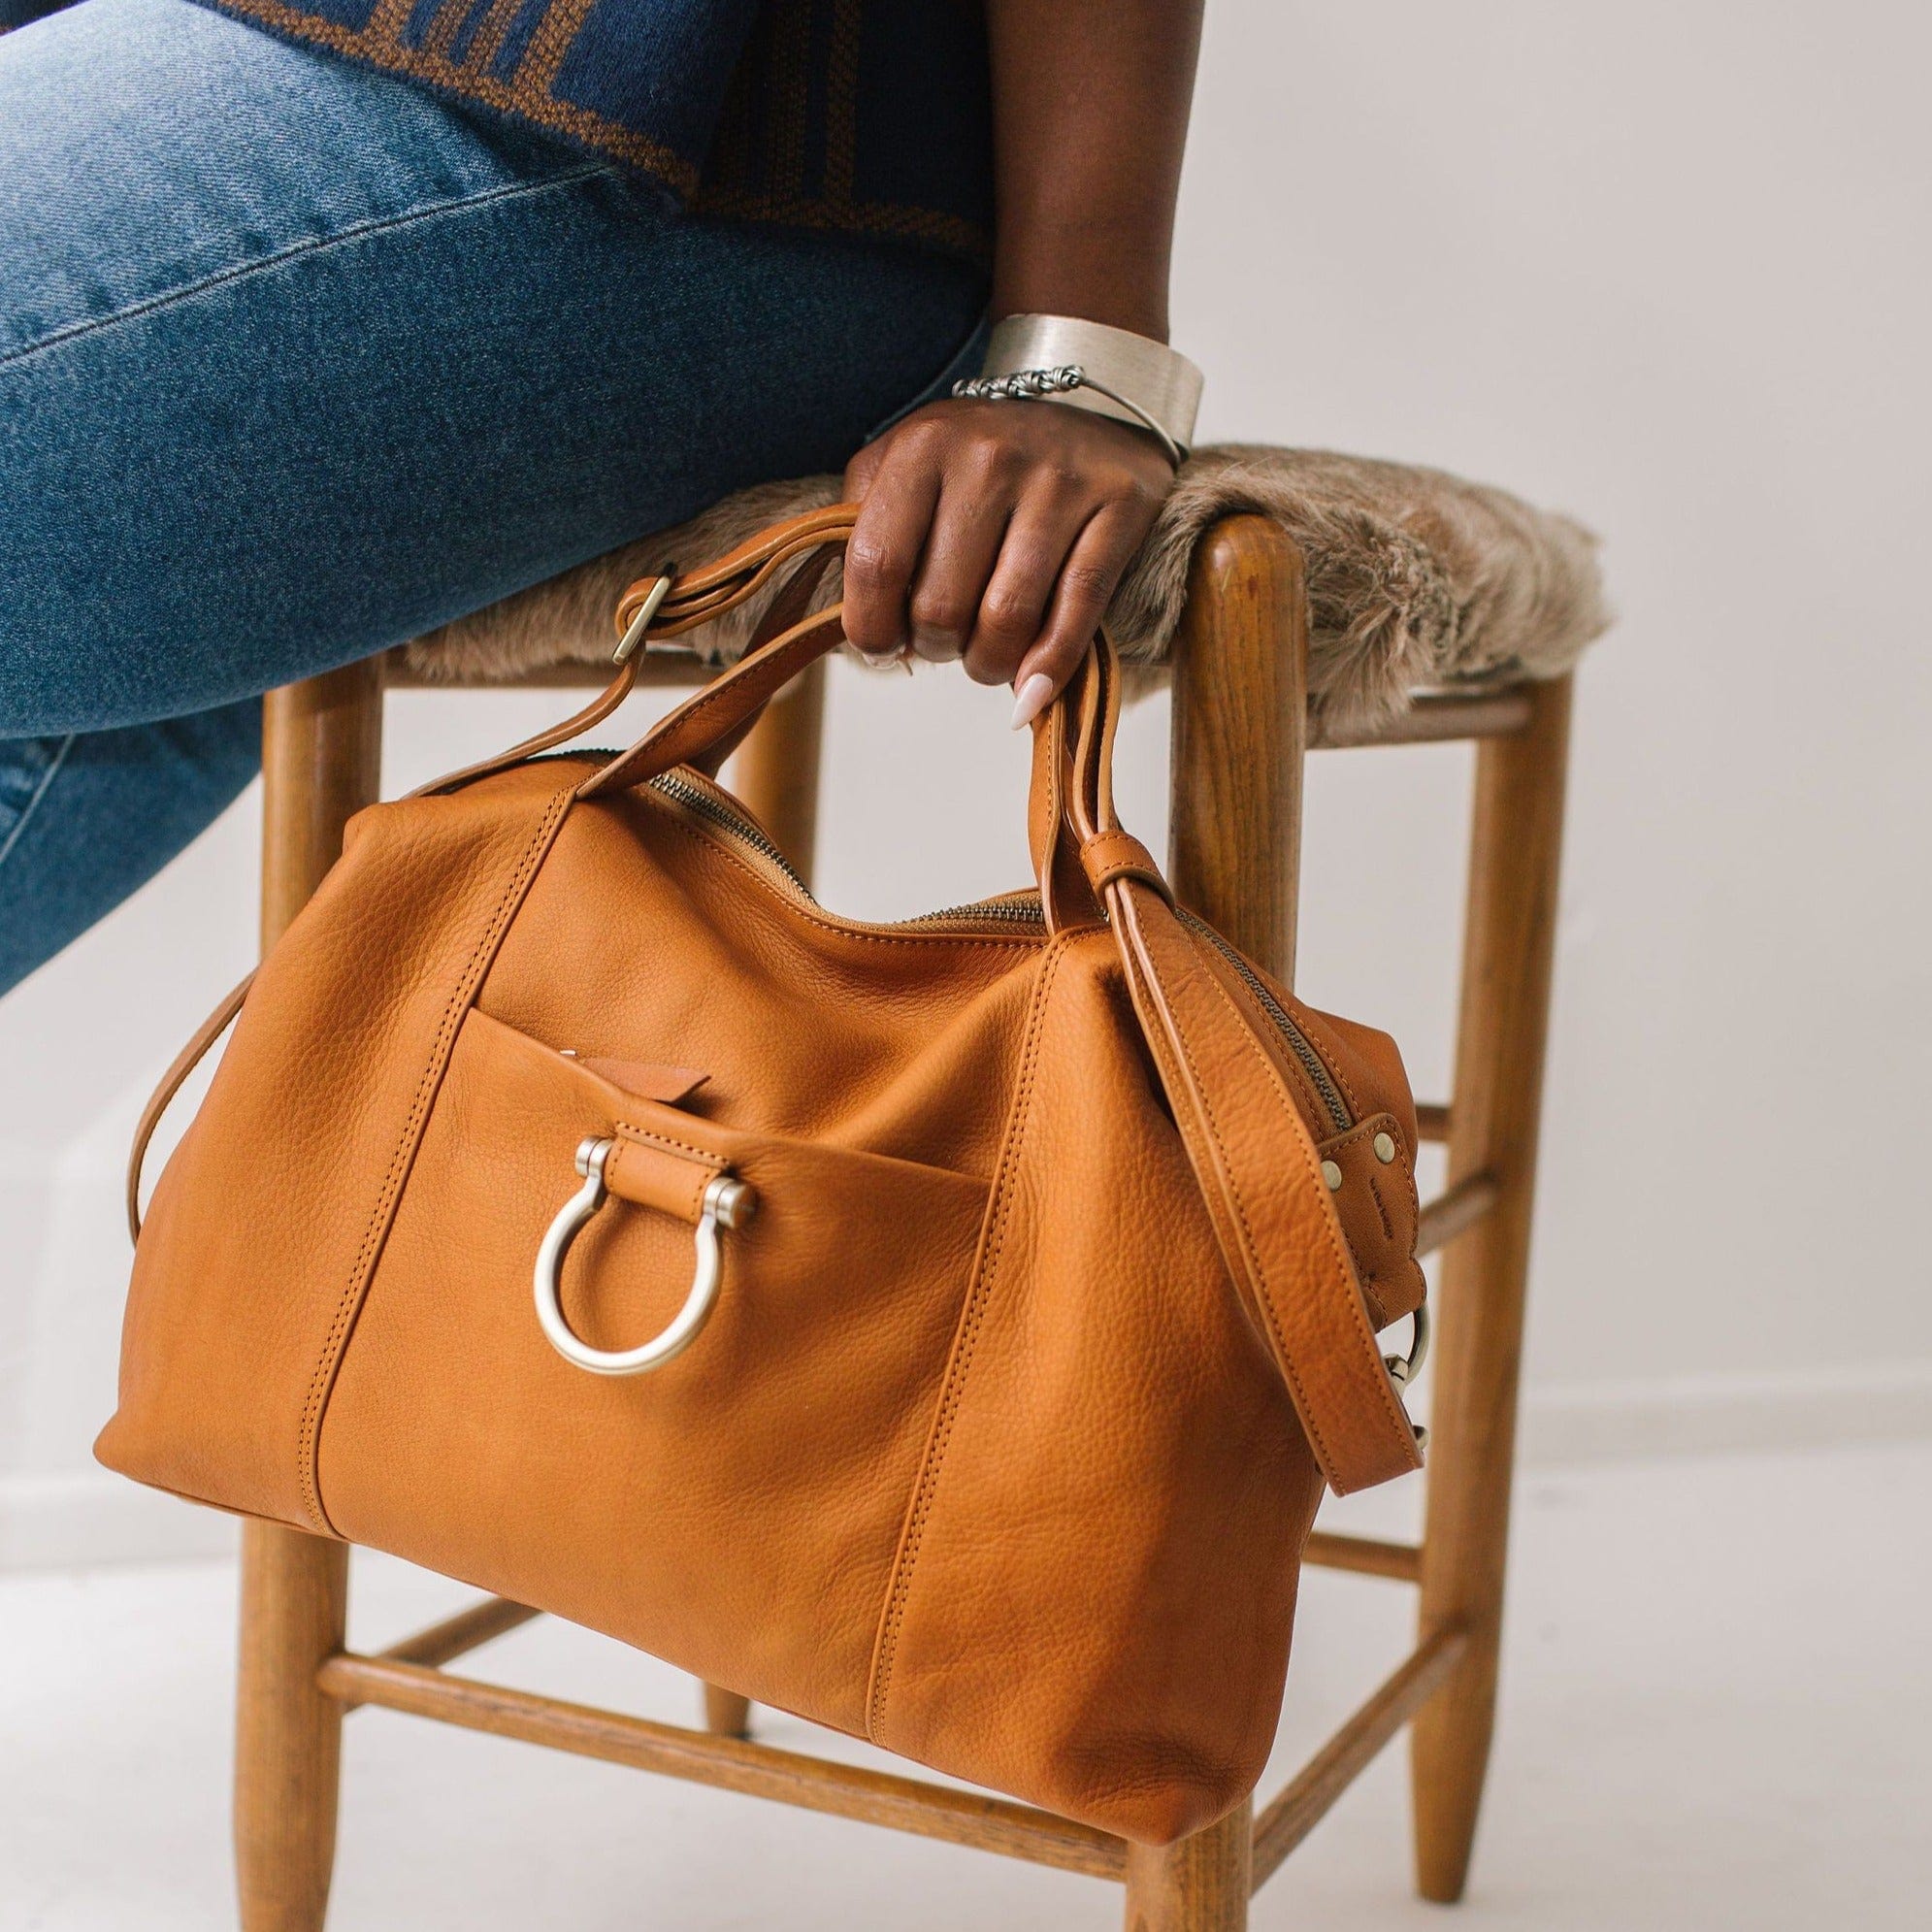 Linda Jean handbag in whisky tan raw leather can be carried by the top straps.